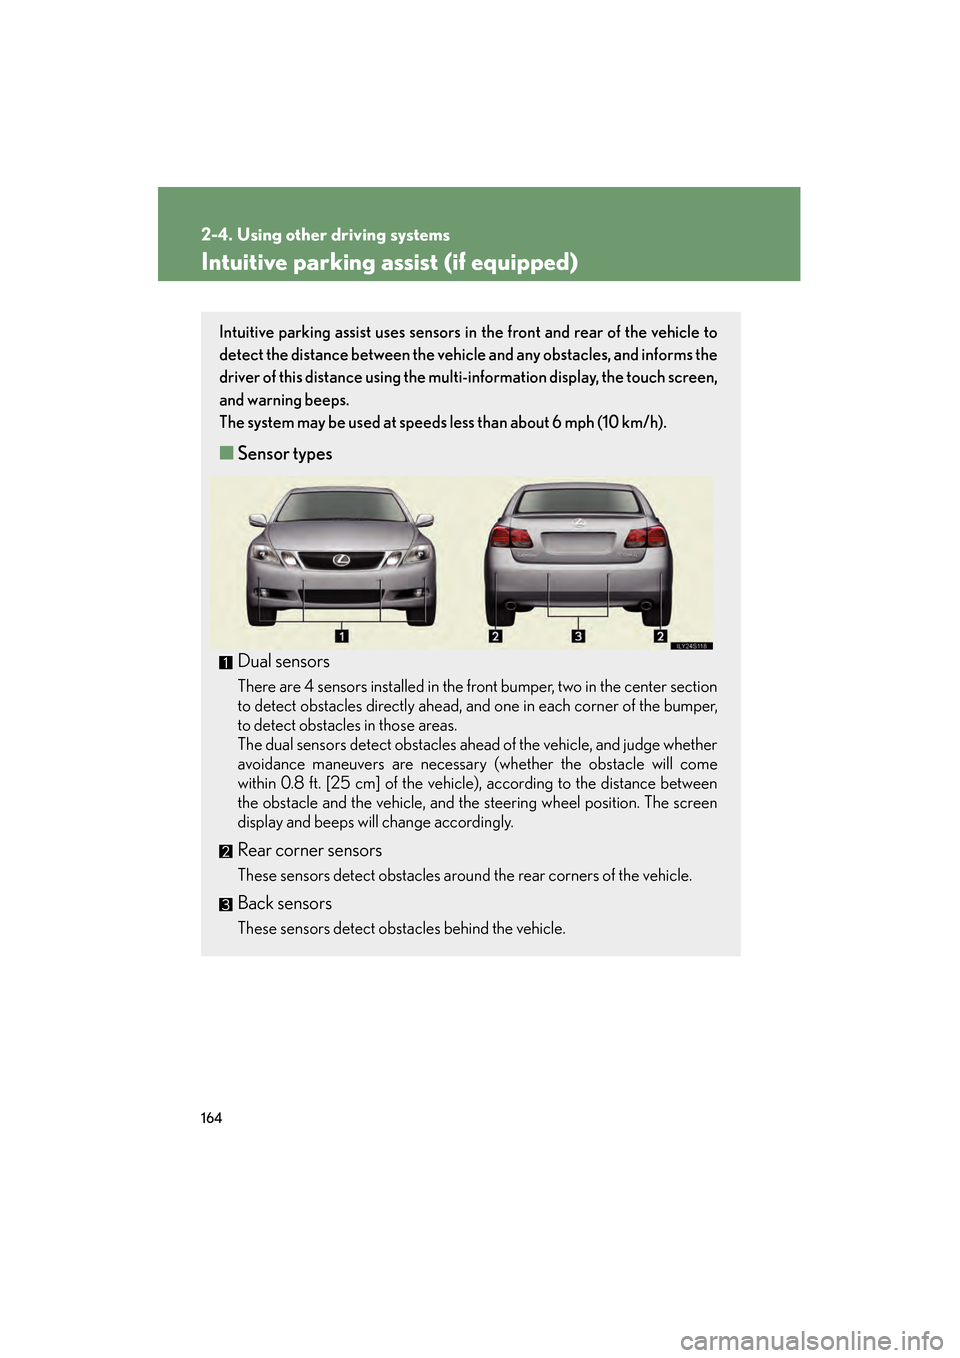 Lexus GS350 2008  Owners Manual 164
2-4. Using other driving systems
GS_G_U
June 19, 2008 12:54 pm
Intuitive parking assist (if equipped)
Intuitive parking assist uses sensors in the front and rear of the vehicle to
detect the dista